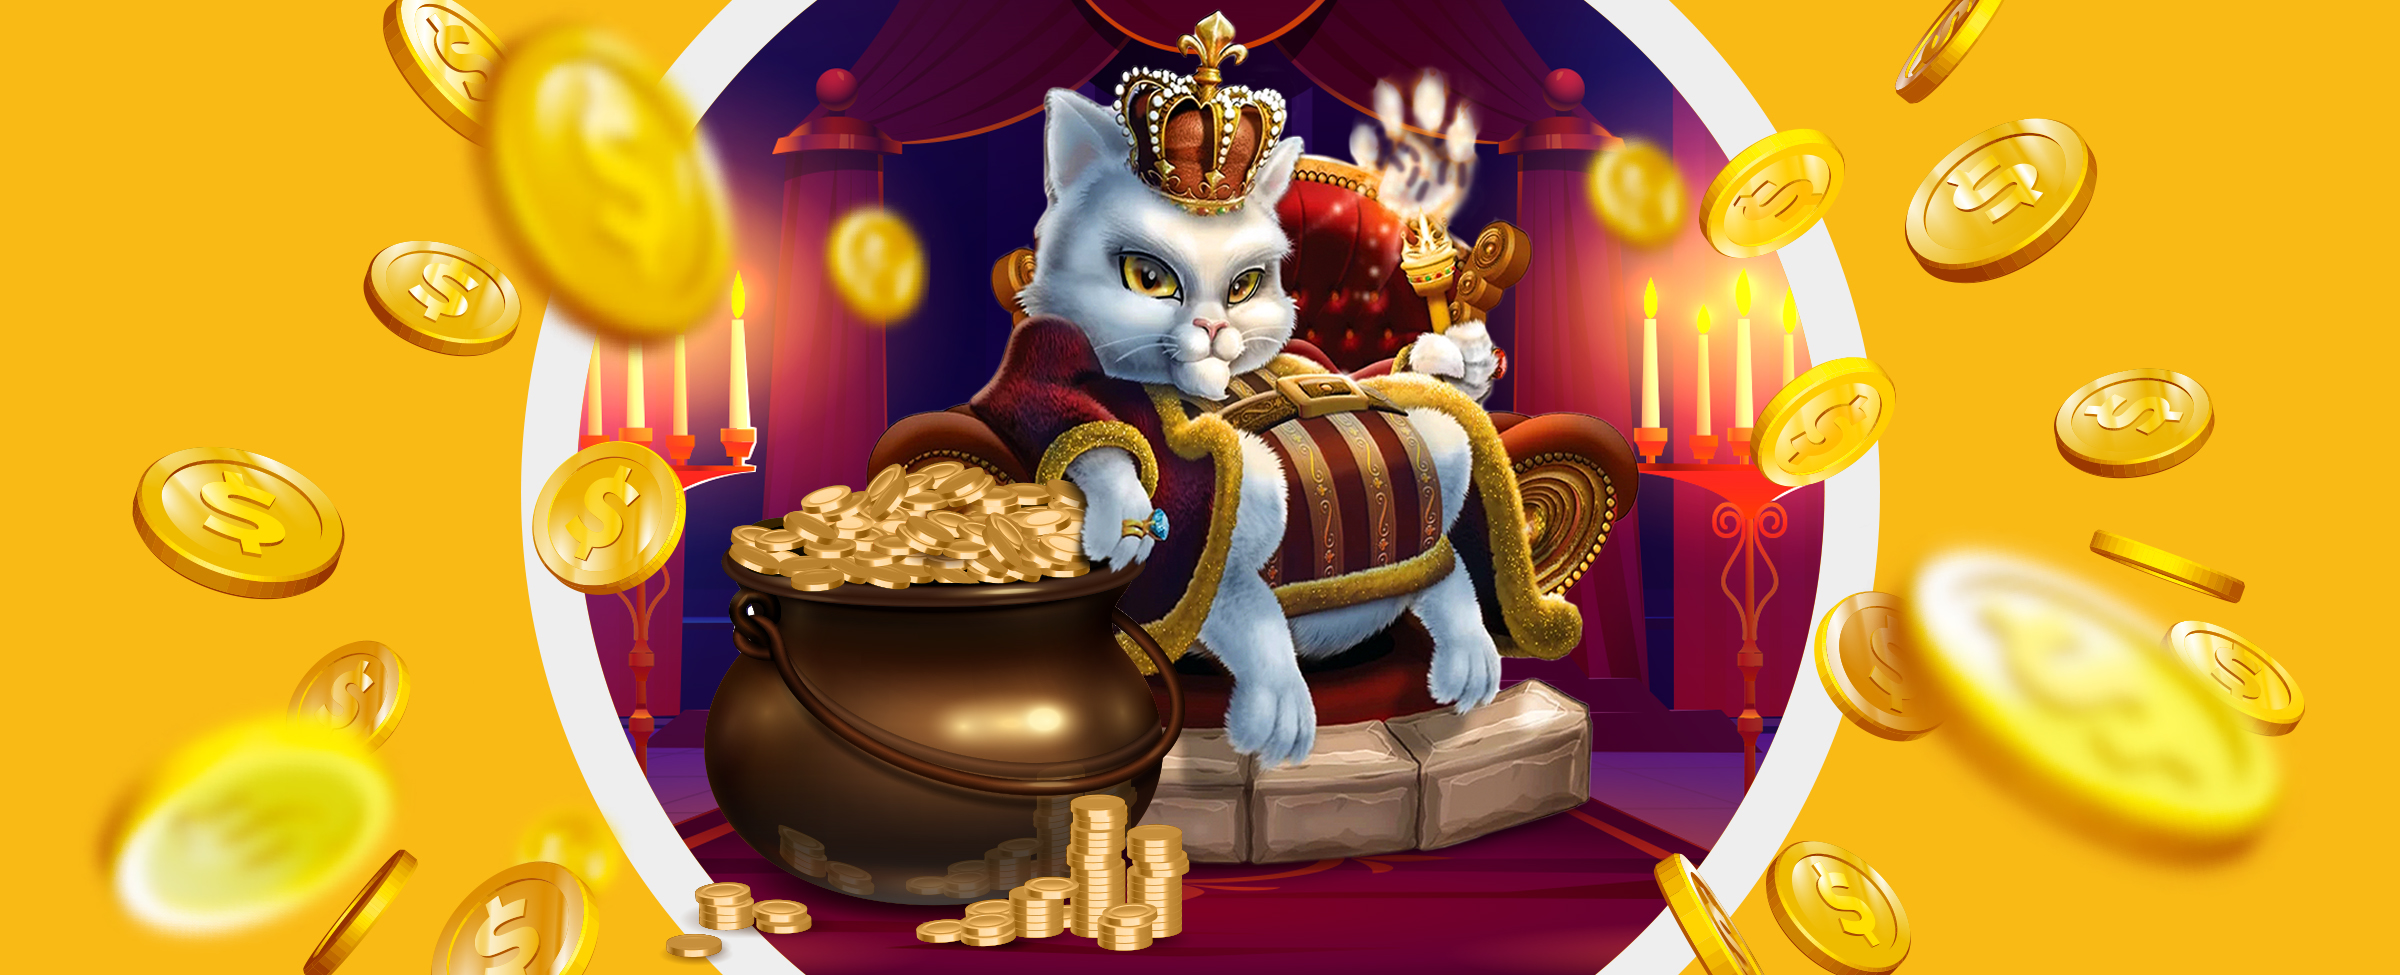 Attention cat lovers: today is a tribute to your furry feline friend! Join Joe as he reviews the most pur-fect of pet-themed pokies online - Cat Kingdom. 